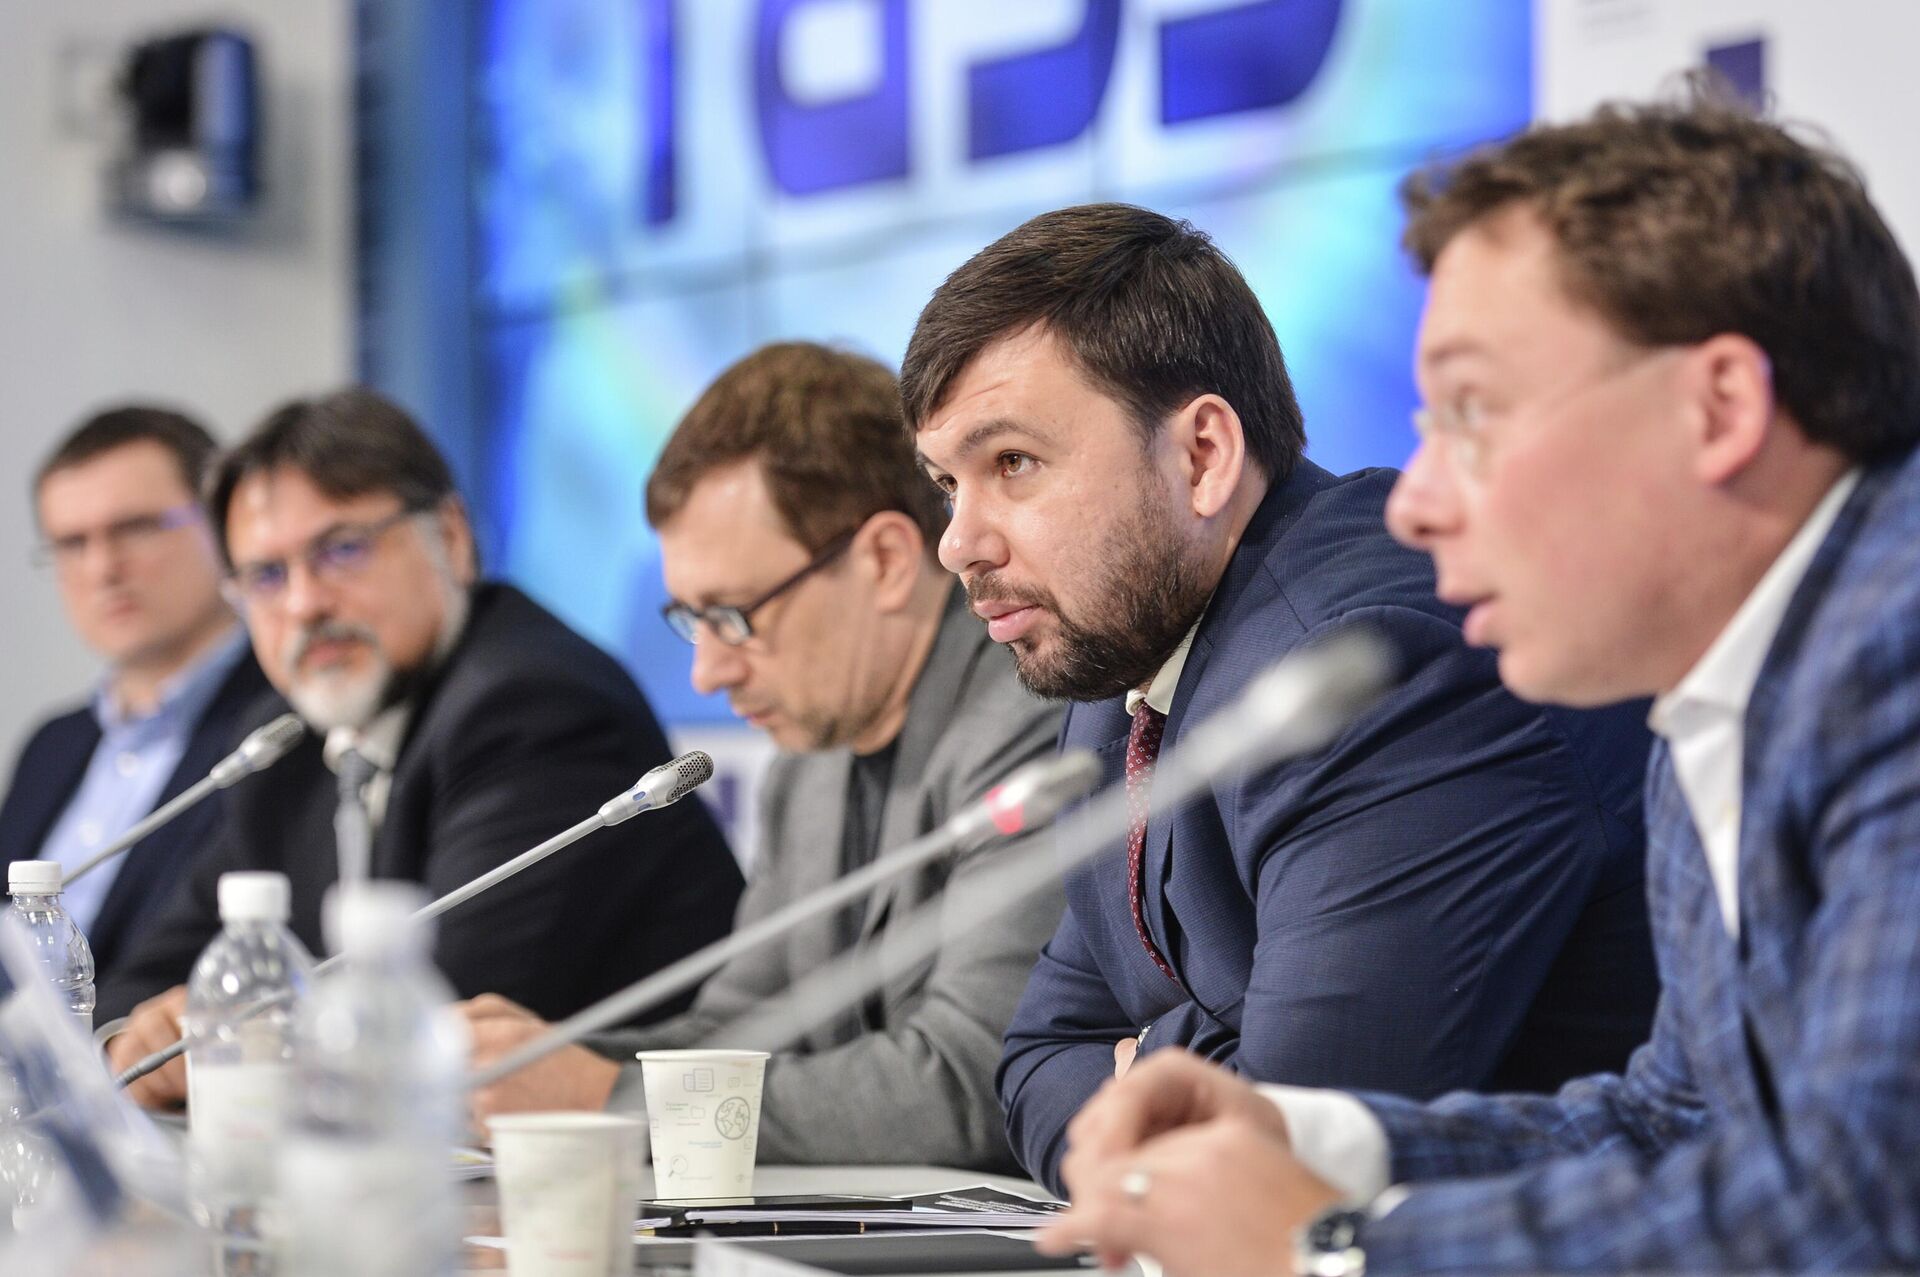 Denis Pushilin, second left, representative of the Donetsk People's Republic for the settlement of the situation in eastern Ukraine, during the roundtable, Minsk Agreements: The Results of 2015. - Sputnik International, 1920, 10.04.2022